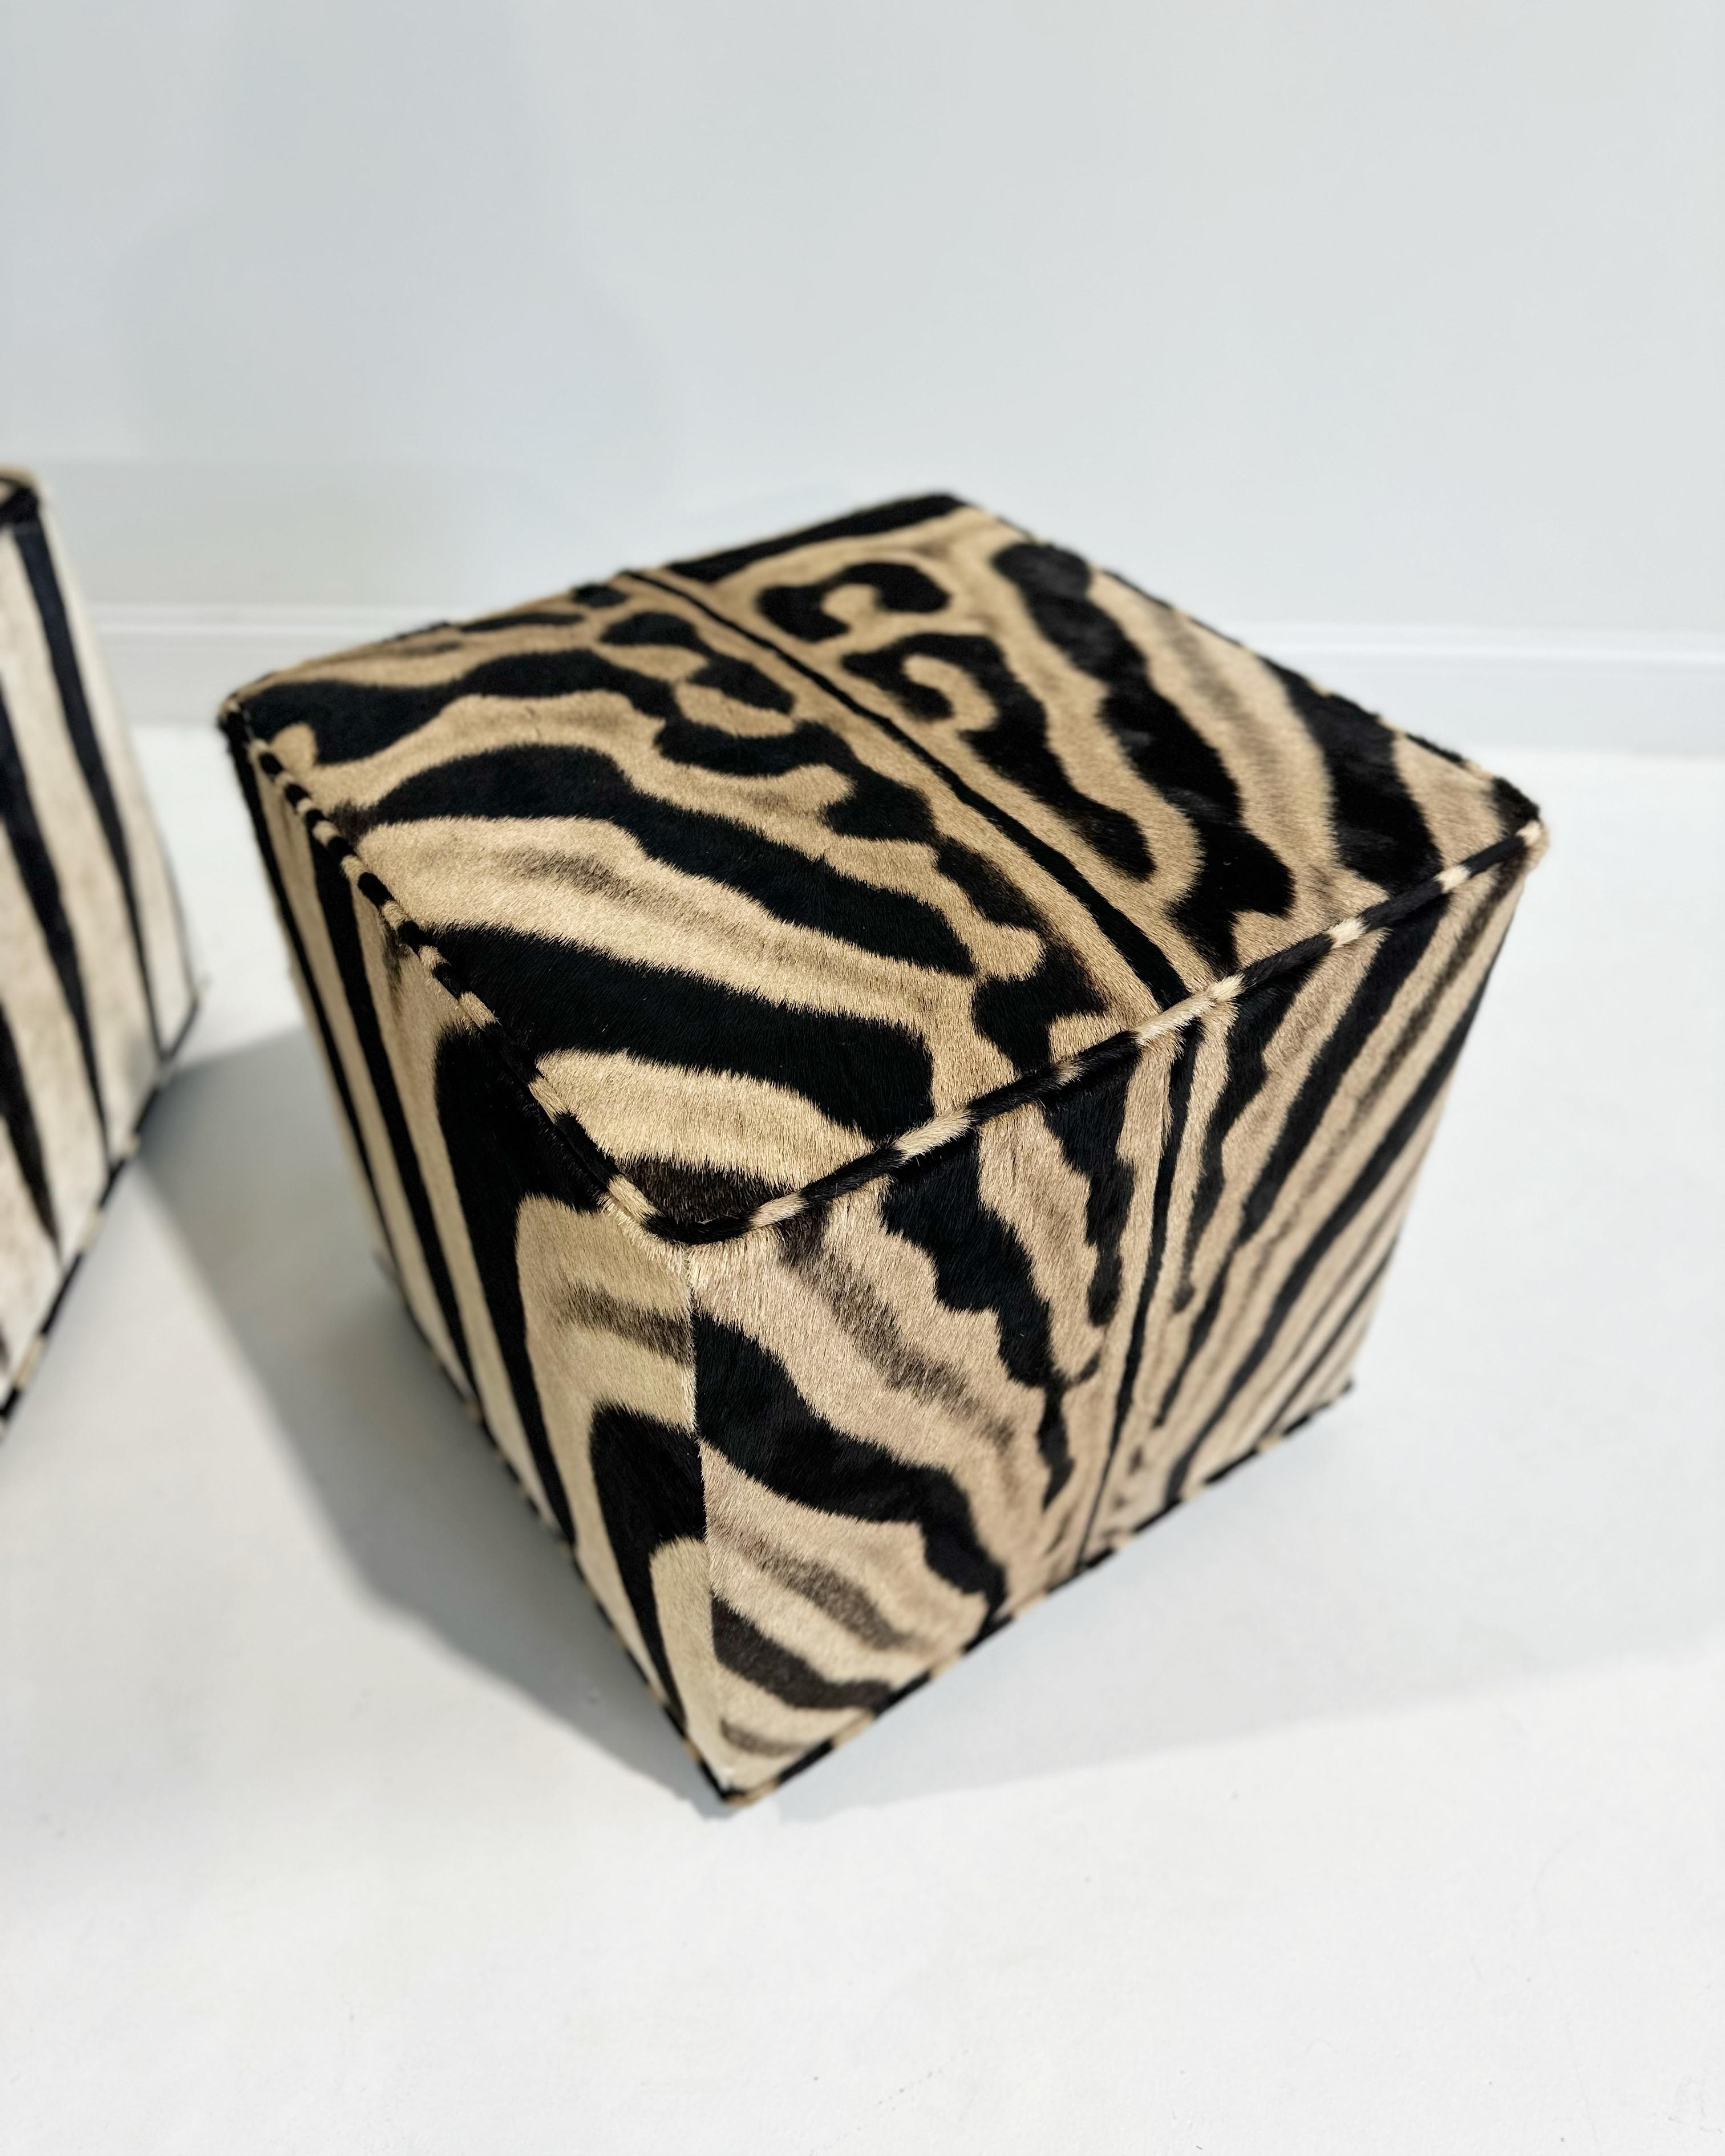 Part of the Forsyth Originals Collection. The Forsyth Cube Ottoman is designed and handcrafted from our zebra hides. This is a versatile piece for any room adding natural texture and pattern. The perfect coffee table, ottoman, bench at the end of a